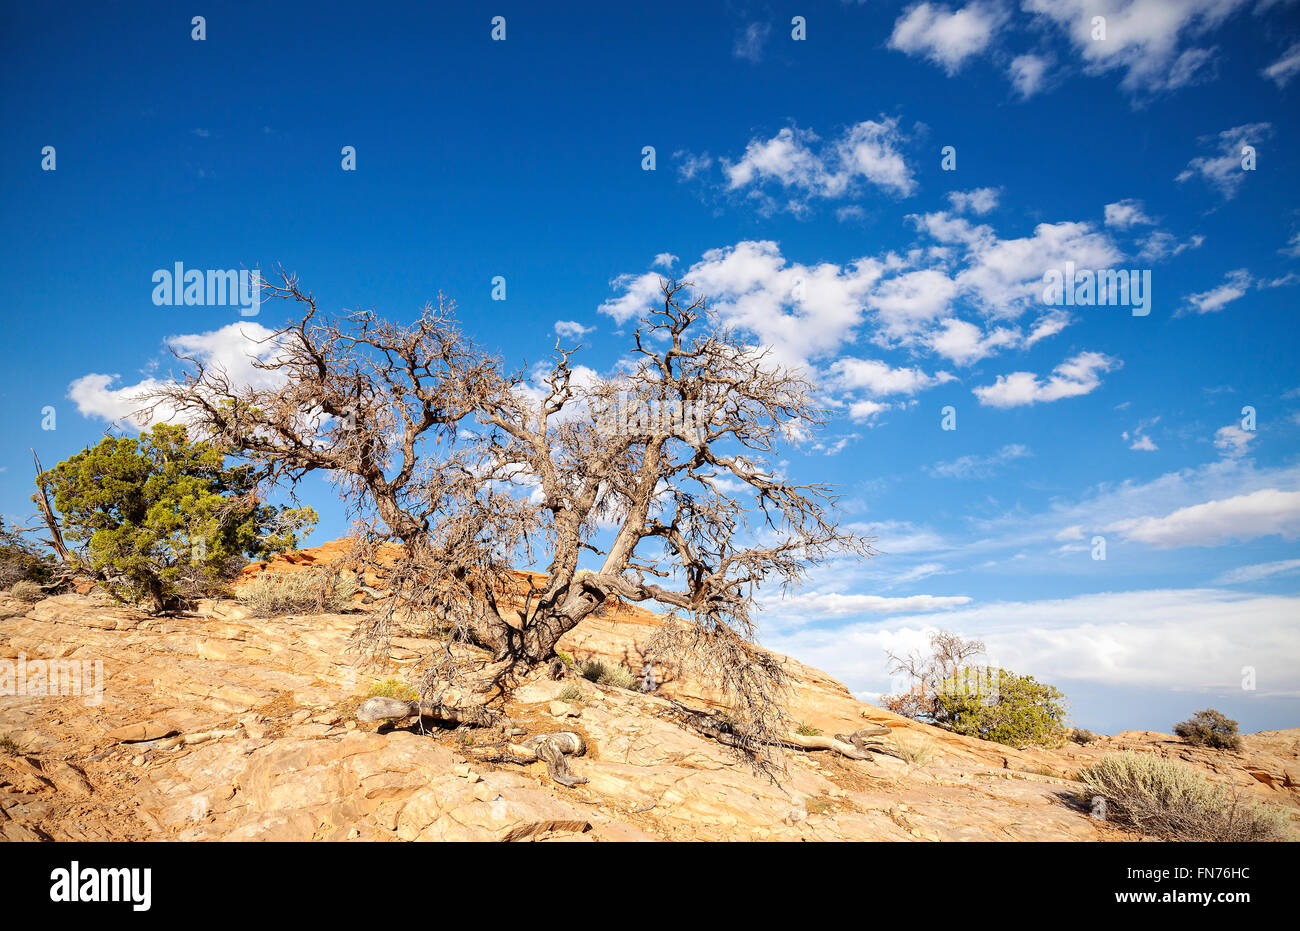 Wild landscape with dry tree and blue sky. Stock Photo